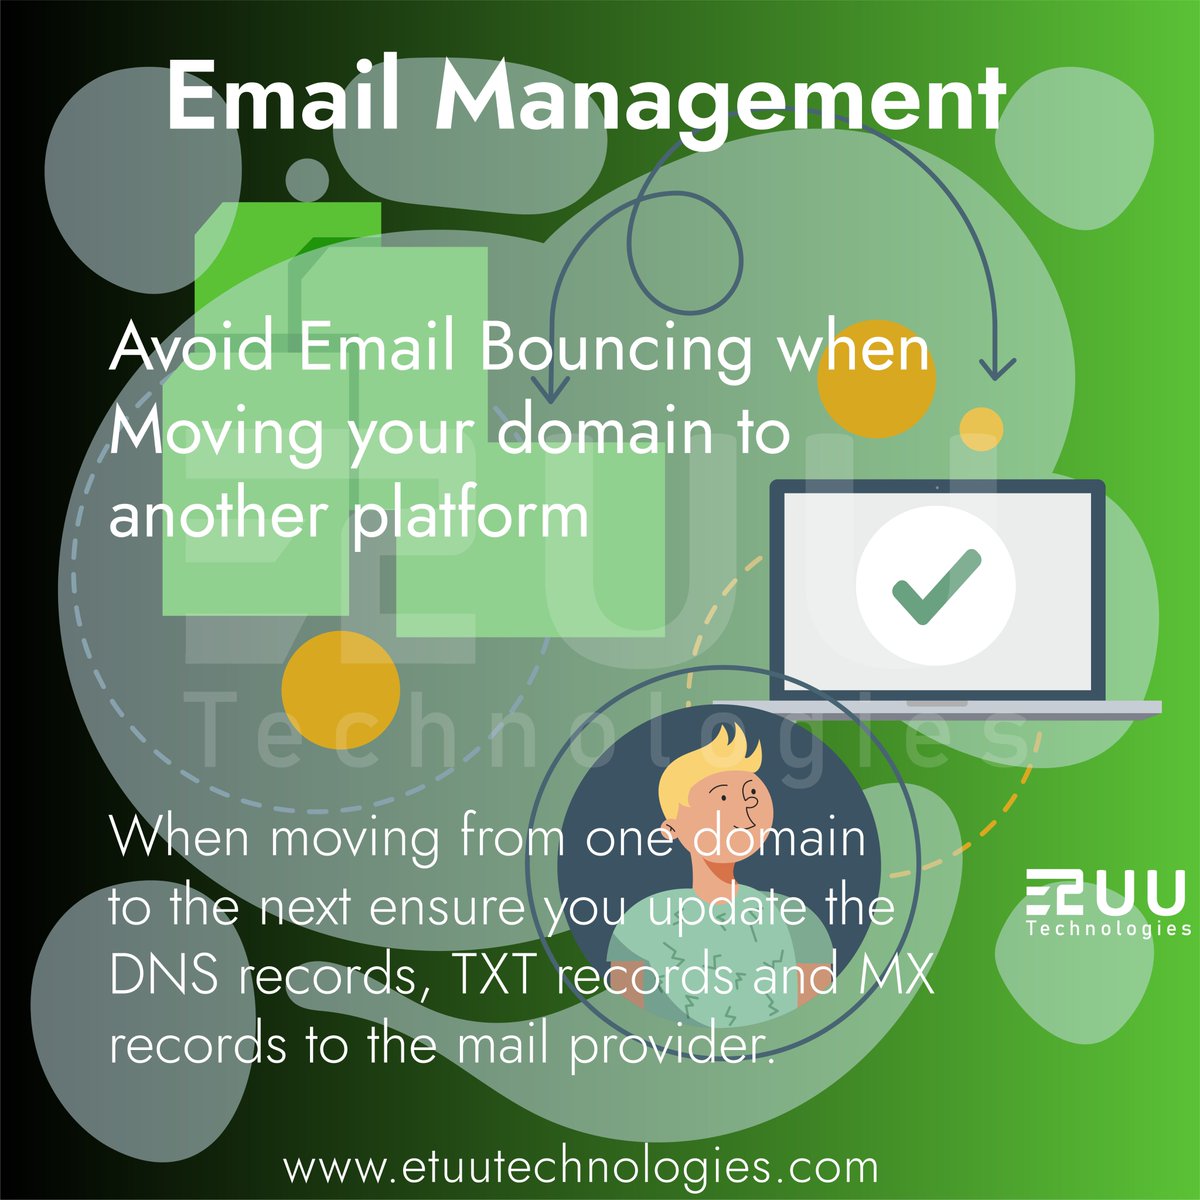 Email management, email migration support, domain transfer enquiry etuutechnologies.com/how-to-avoid-e… @truehostcloud #cpanel @gmail #googleworkspace #gsuite #etuutechnologies #itserviceprovider #manageditservices